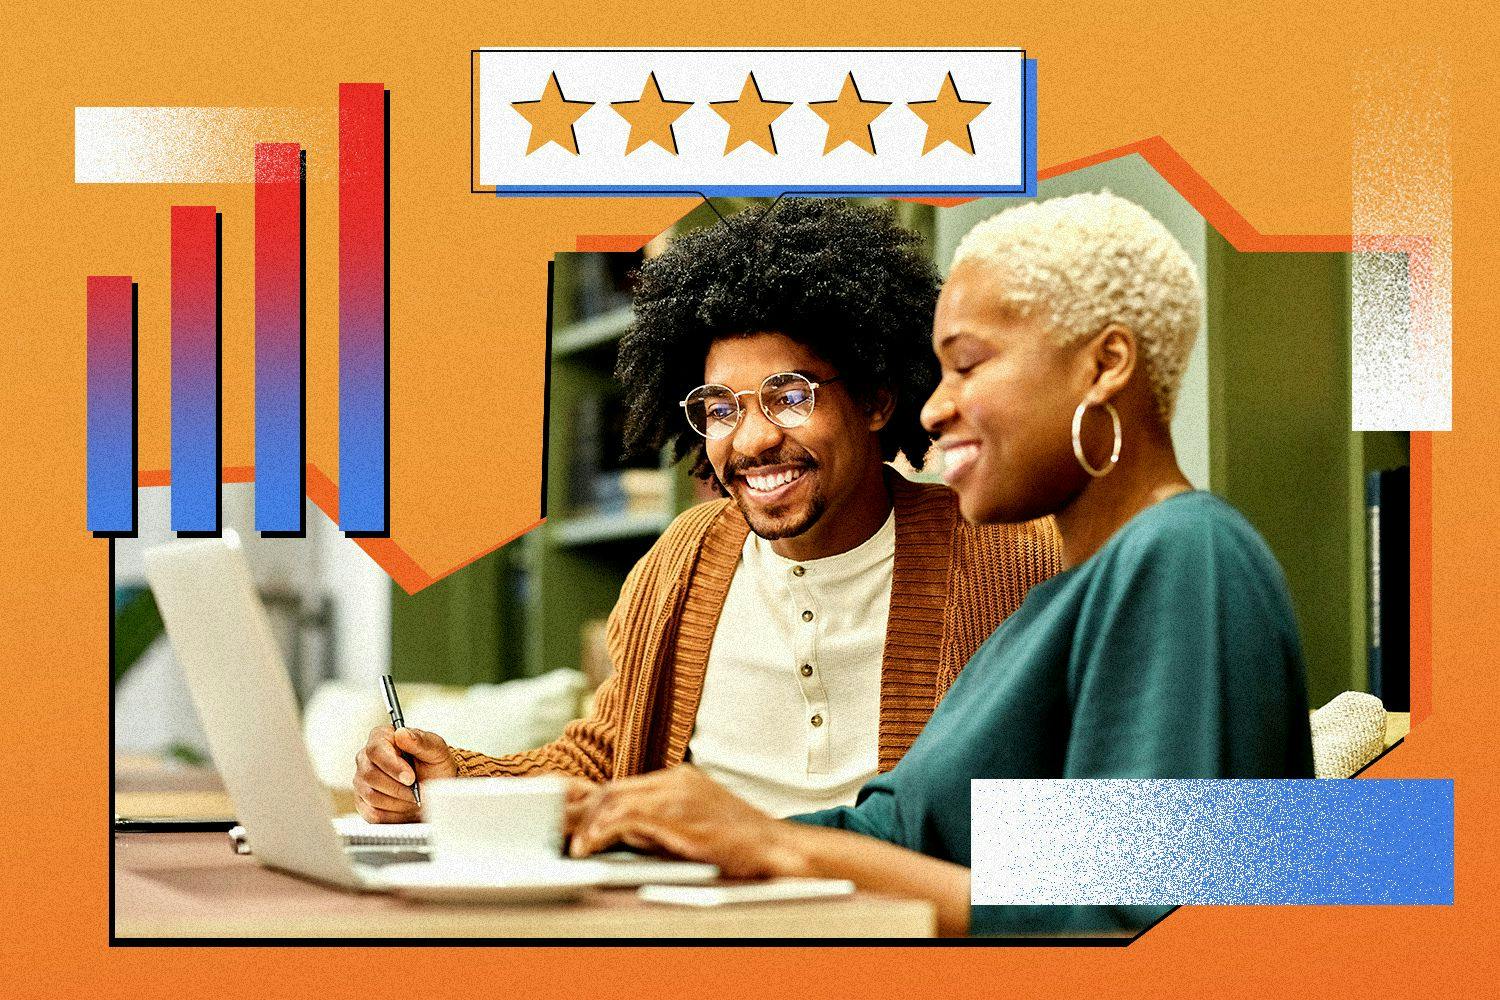 an image of two people (a man and a woman) looking at a computer, smiling. overlayed are graphics including a bargraph and stars